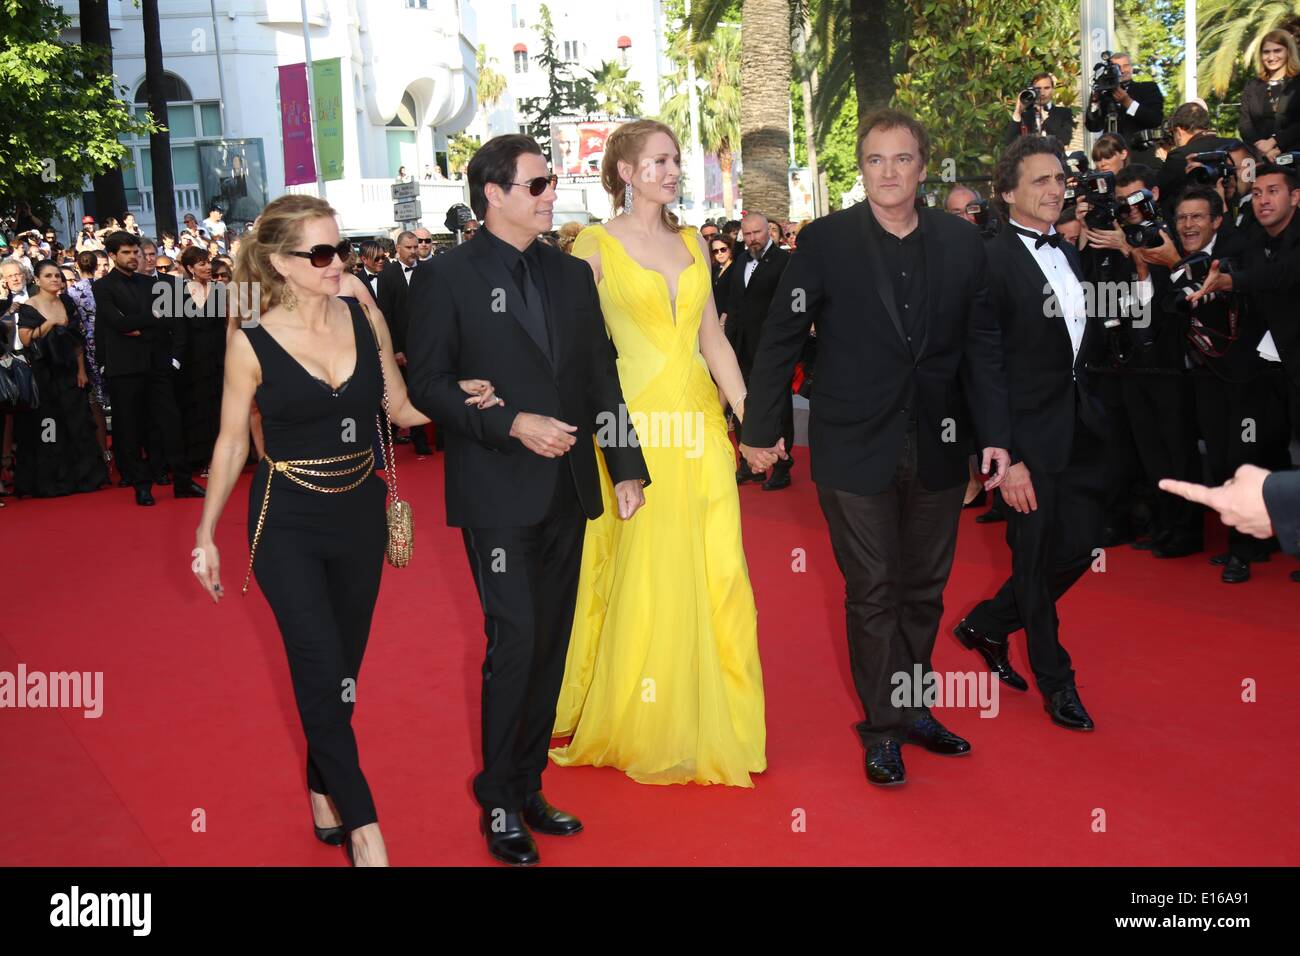 Cannes, France. 23rd May, 2014. US actors Kelly Preston (L-R), John Travolta, Uma Thurman, US director Quentin Tarantino and US producer Lawrence Bender attend the premiere of 'Sils Maria' during the 67th Cannes International Film Festival at Palais des Festivals in Cannes, France, on 23 May 2014. Photo: Hubert Boesl-NO WIRE SERVICE- Credit:  dpa picture alliance/Alamy Live News Stock Photo